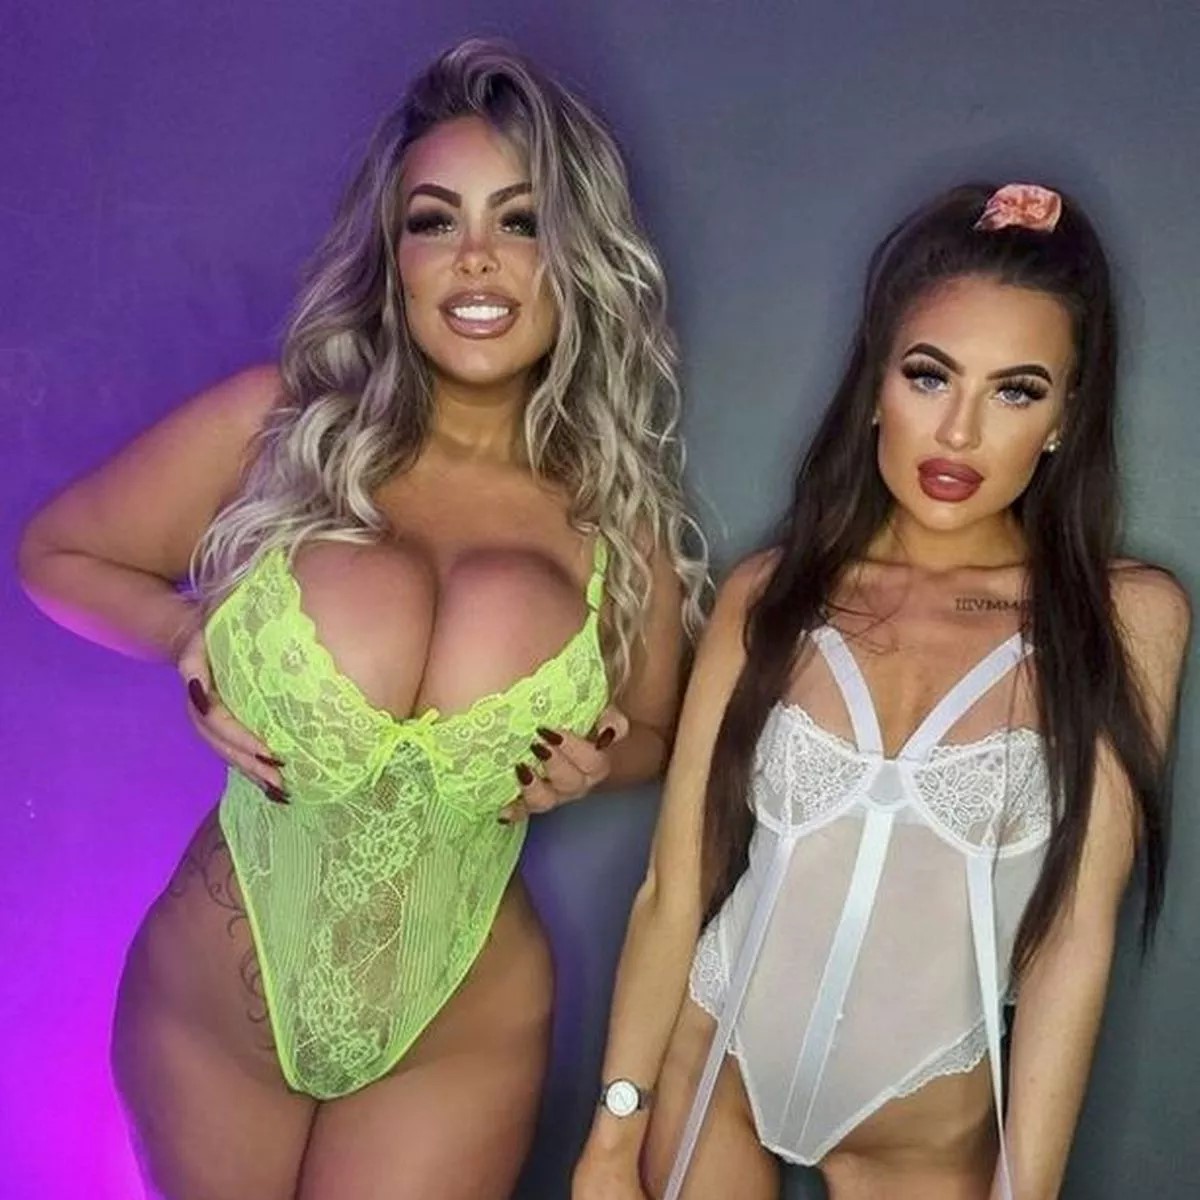 Babestation Mother and Daughter set up joint Onlyfans 